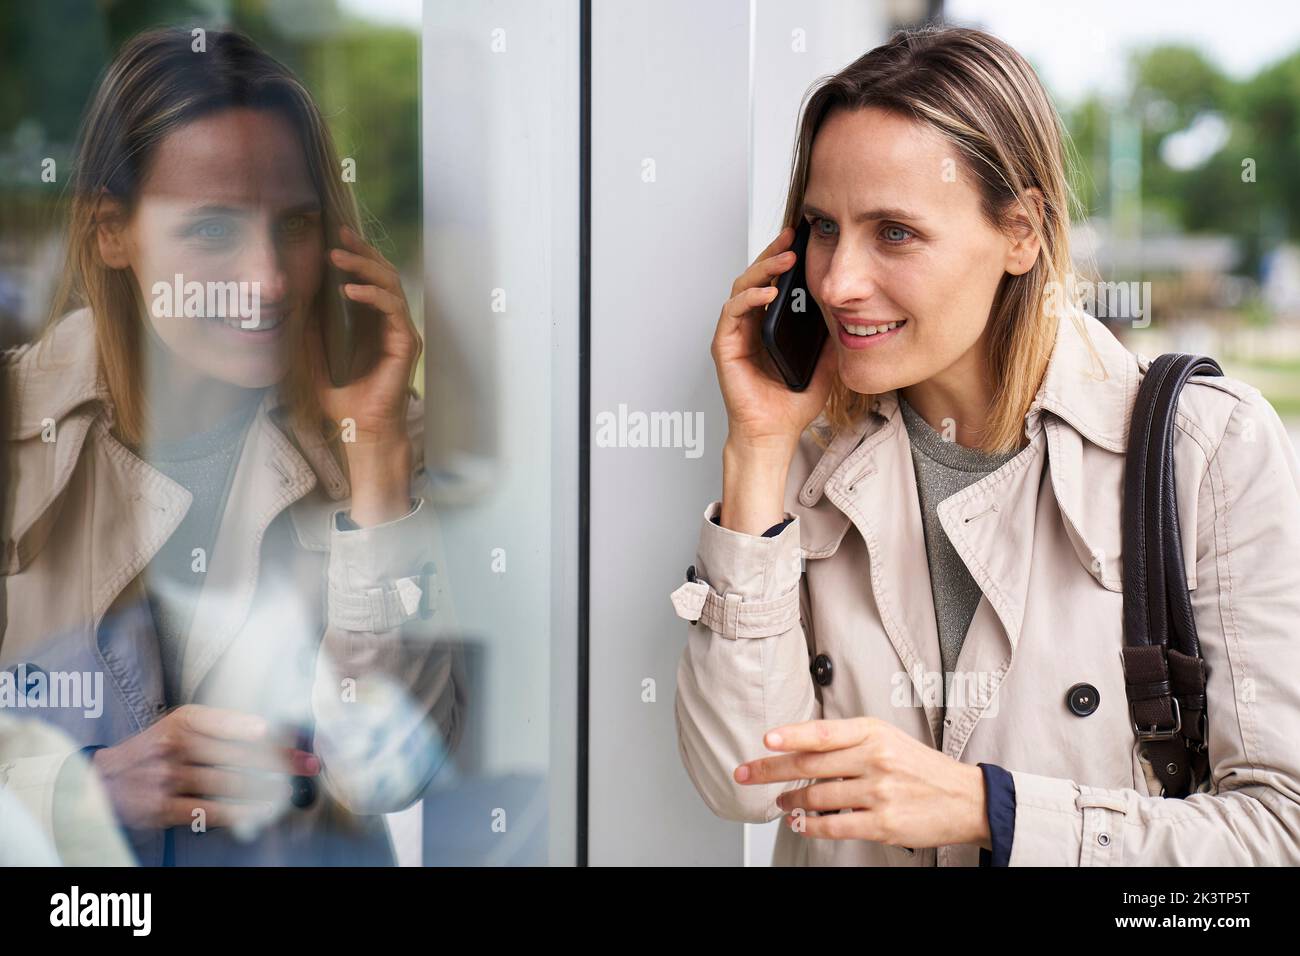 Medium shot of woman and her reflection on shop window Stock Photo